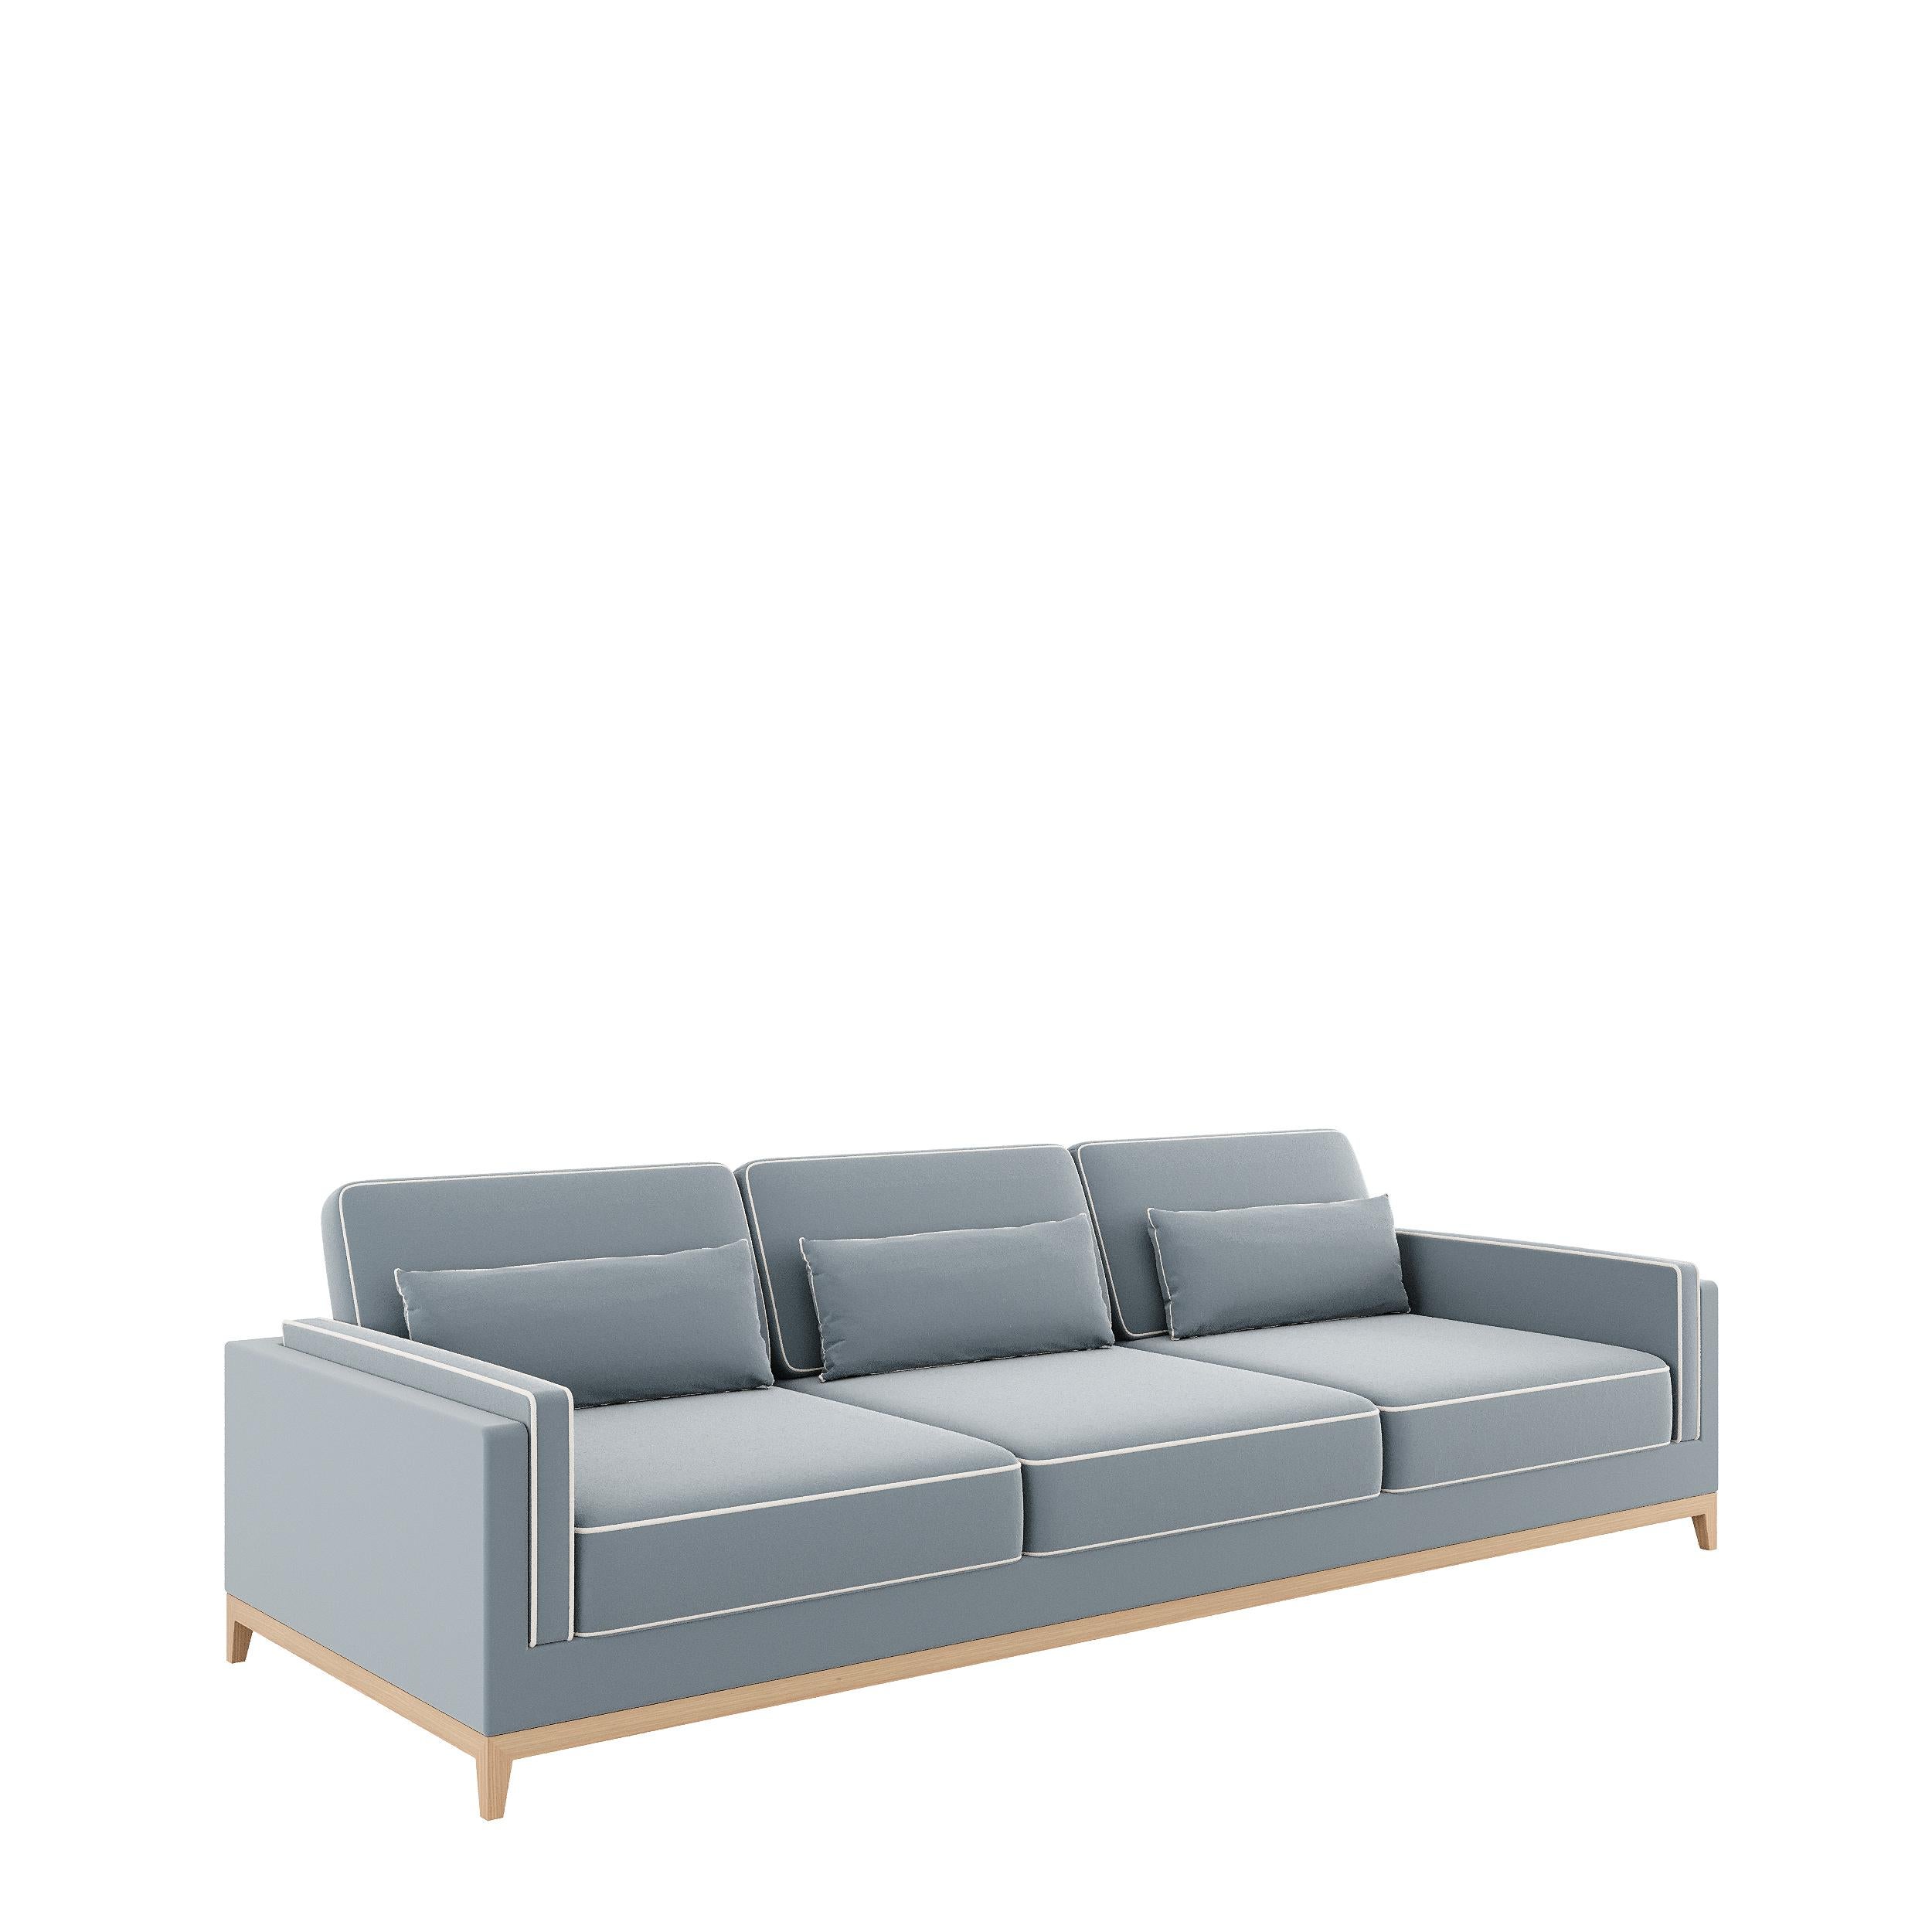 The SINATRA W modular seating system is a modern design sofa and yet a timeless piece. The contemporary style of the Sinatra sofa is characterized by a seamless contrast piping detail that enhances its profile. With solid wood feet, keeping the